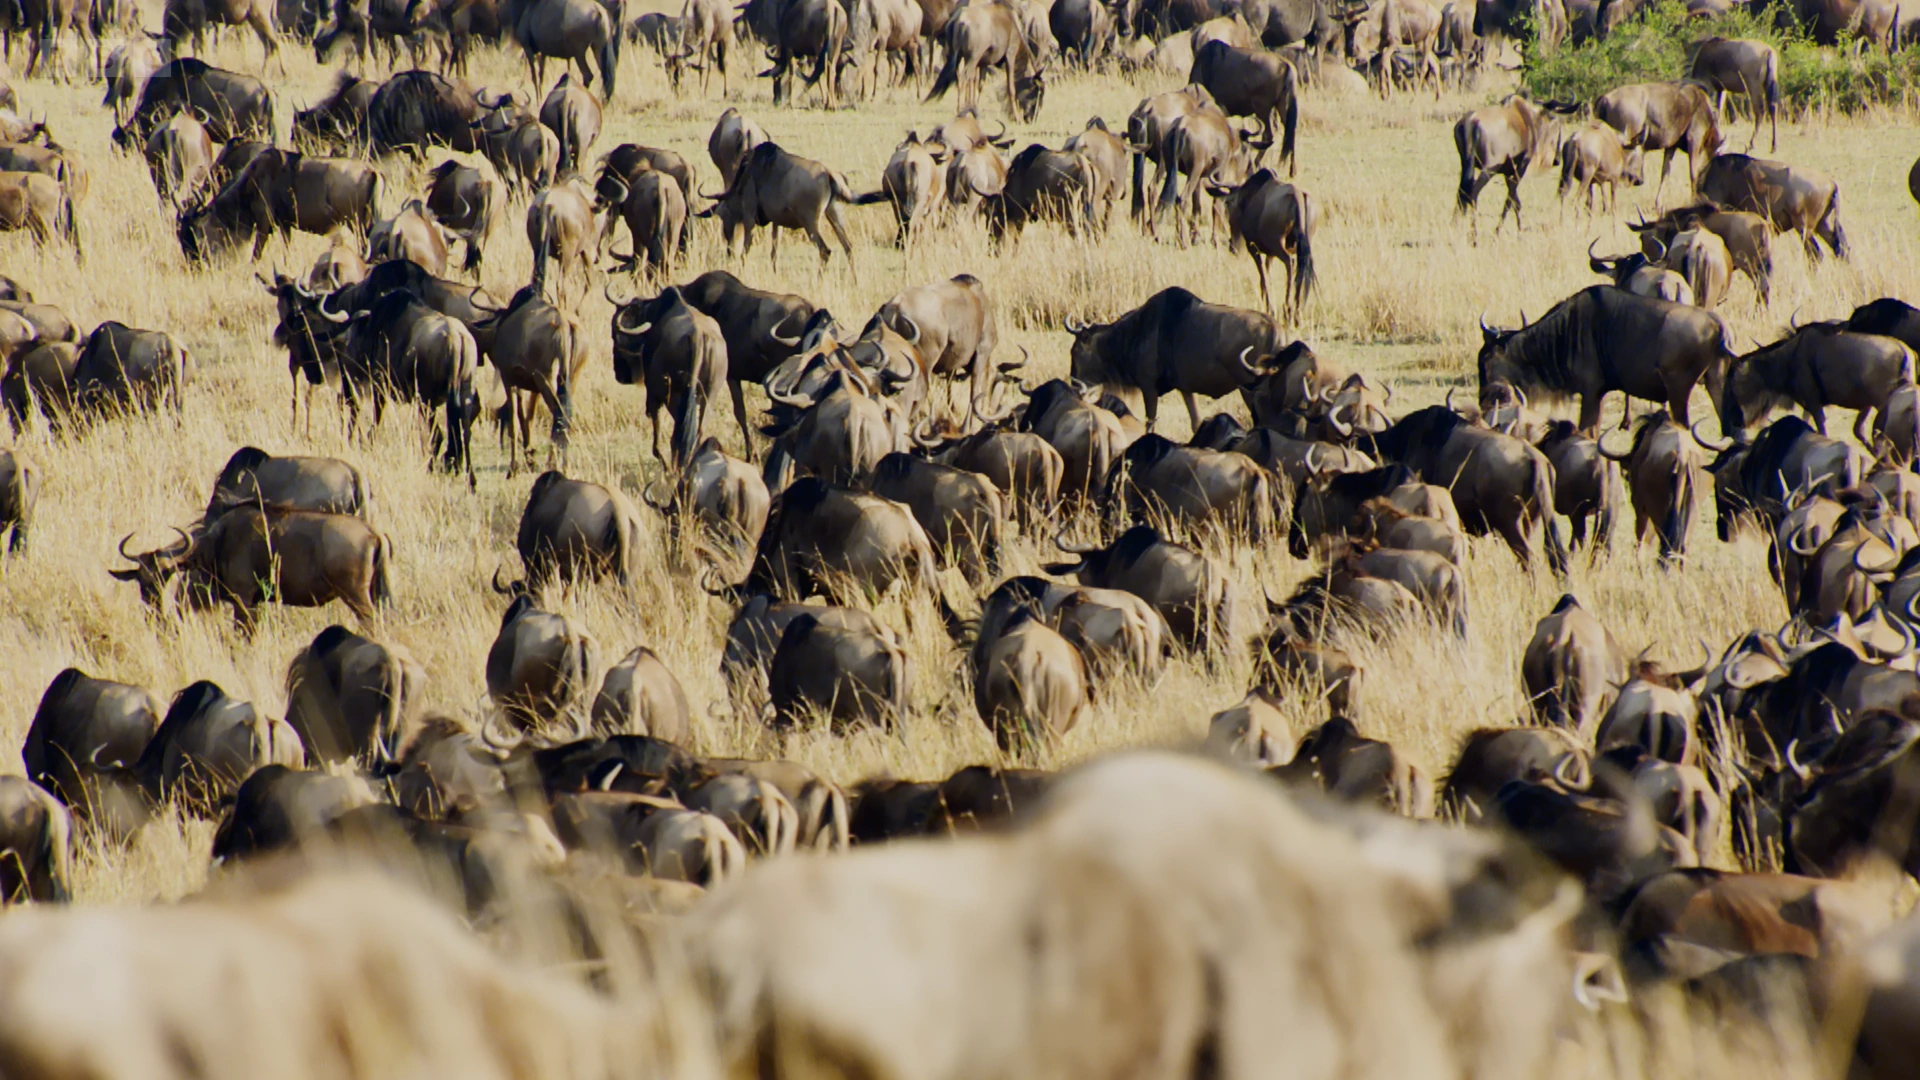 Western white-bearded wildebeest (Connochaetes taurinus mearnsi) as shown in Planet Earth II - Grasslands